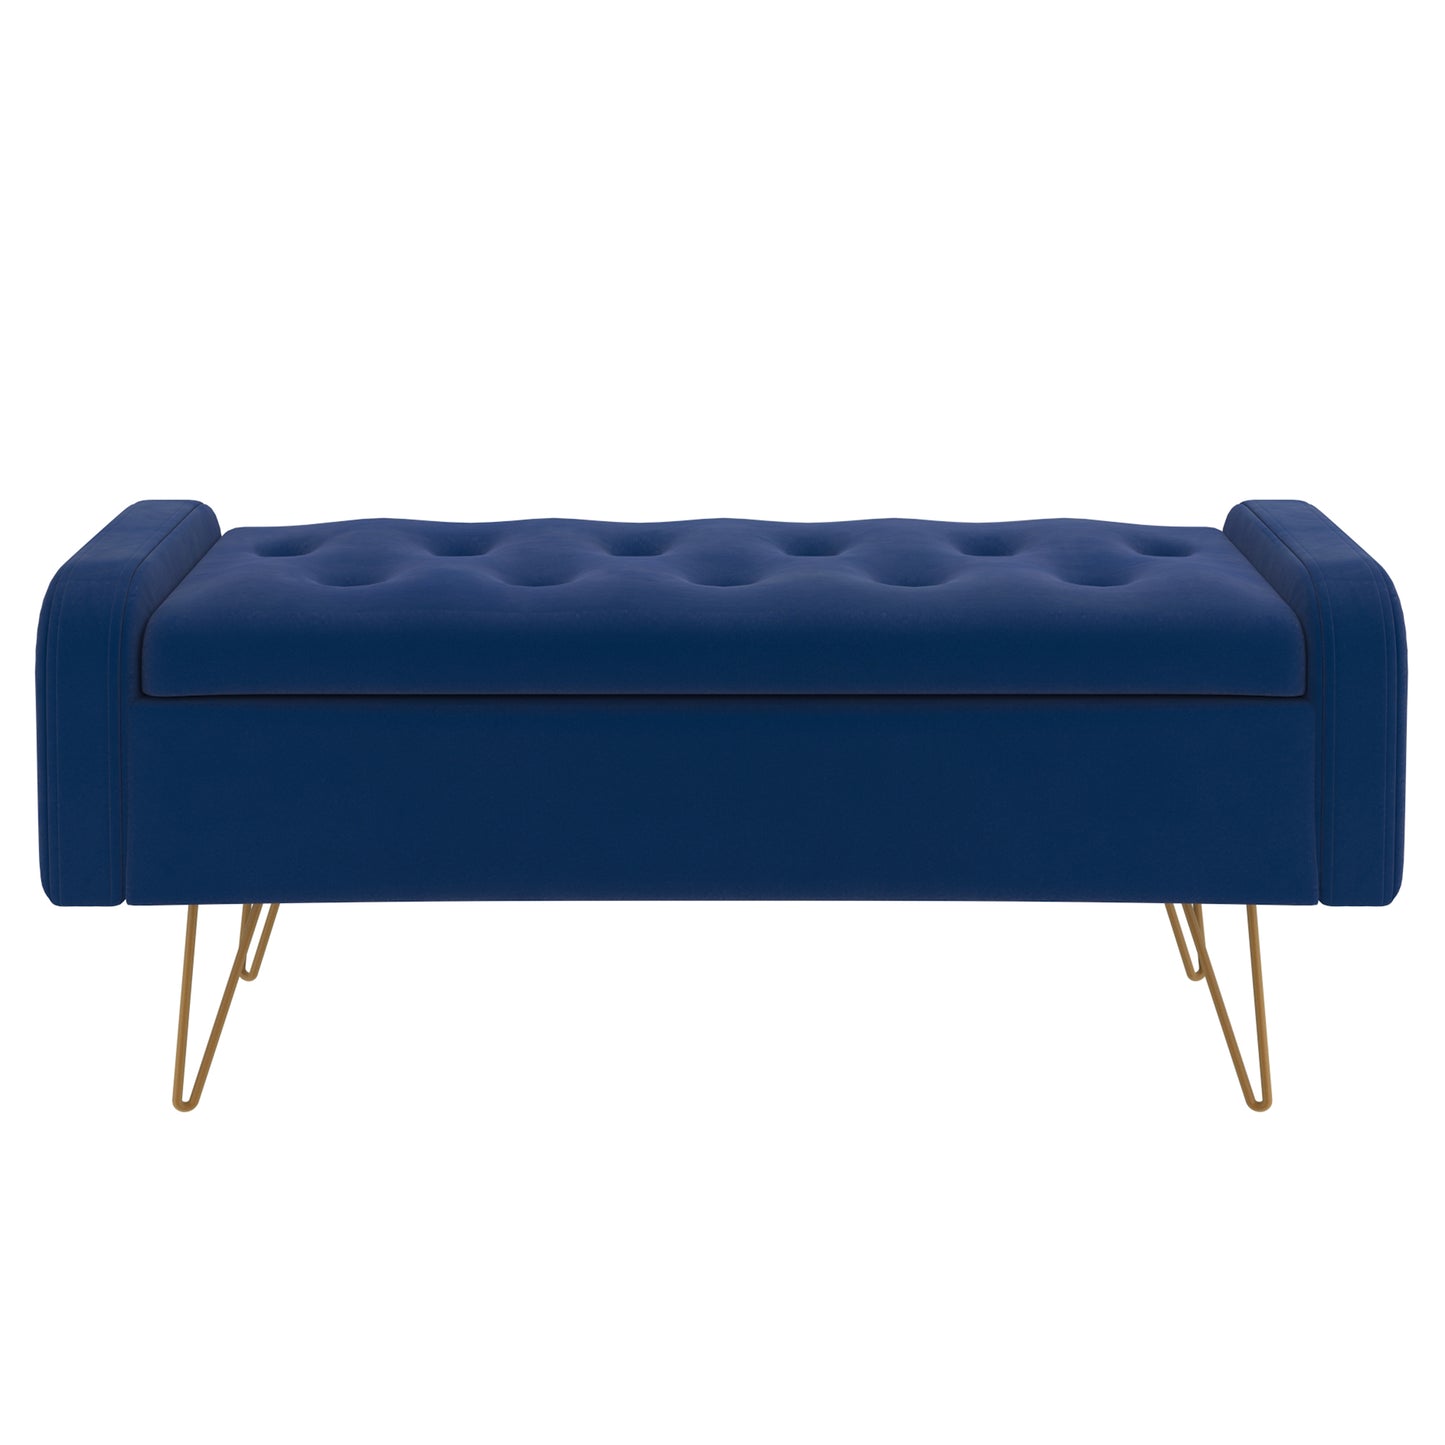 Sabel Storage Ottoman/Bench in Blue and Aged Gold